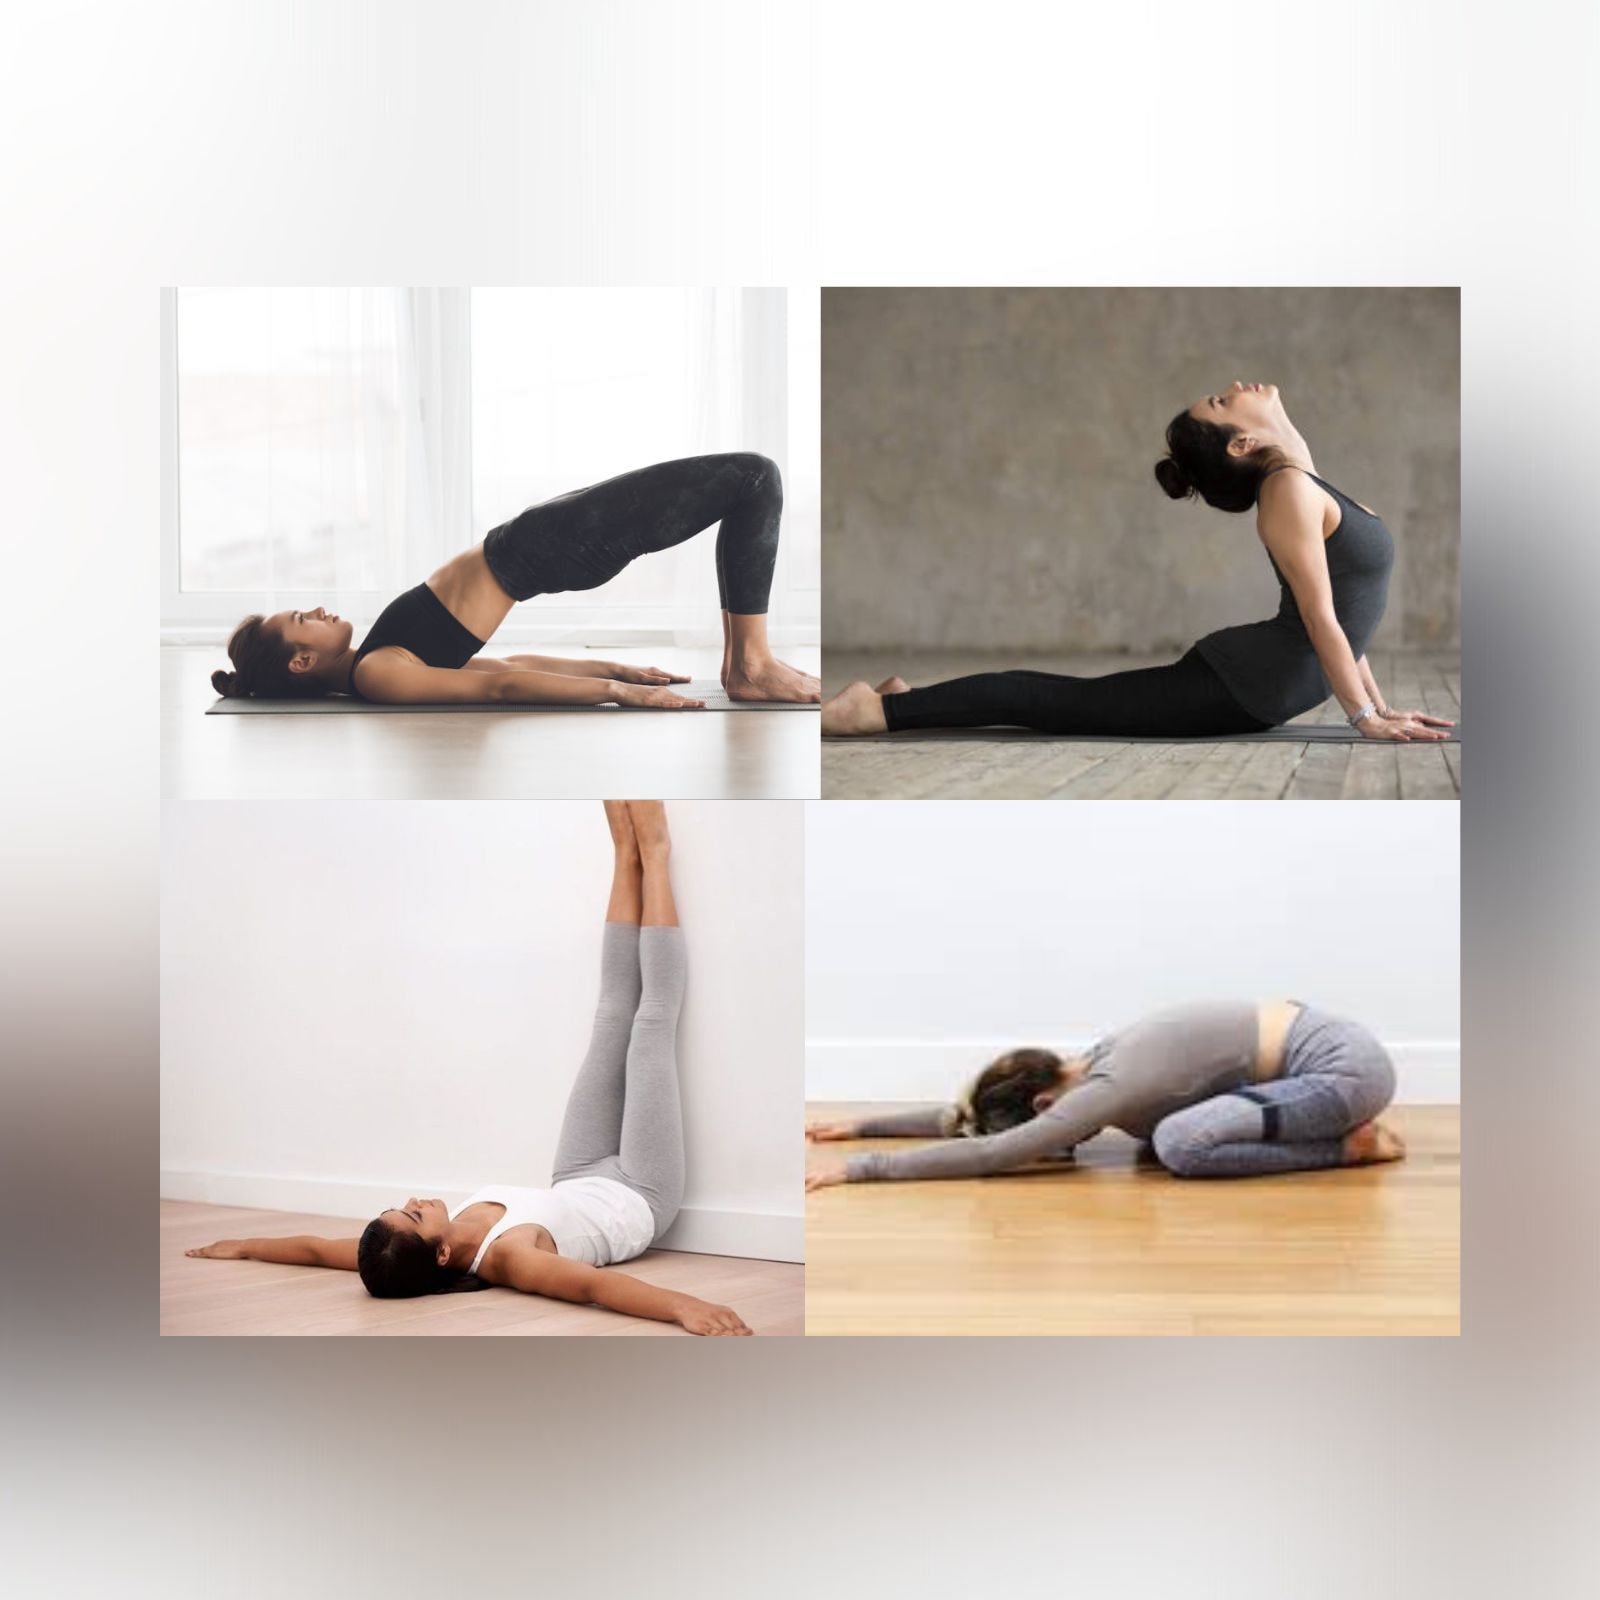 Yoga for Flexible Body: 6 Easy Yoga Poses that Will Help to Improve Your  Flexibility | Yoga to Improve Flexibility & Strength